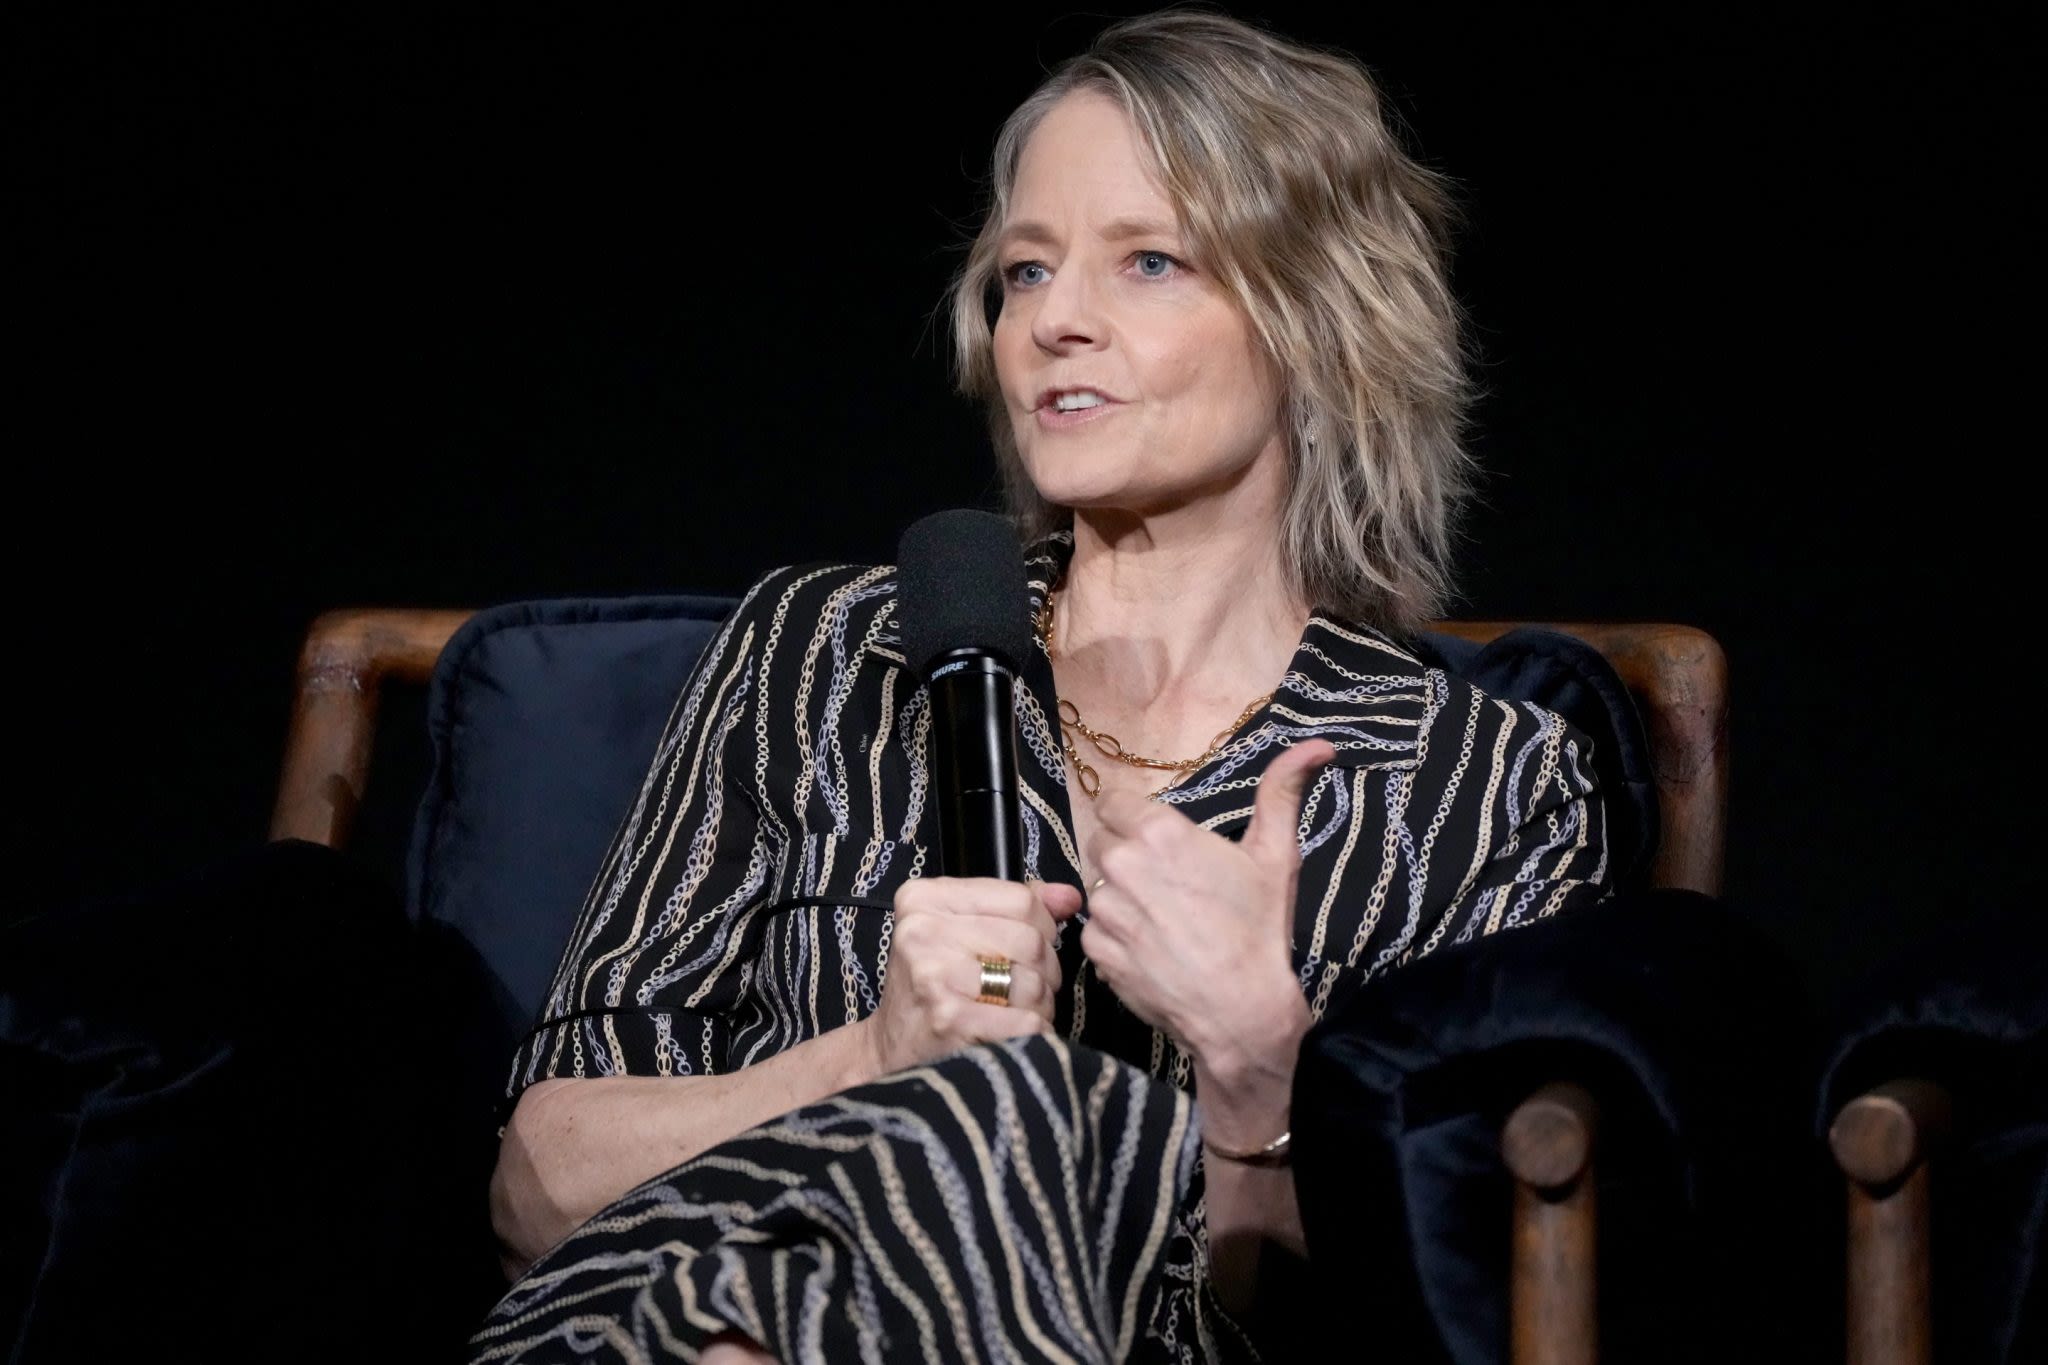 Jodie Foster finds Gen Z ‘really annoying’ to work with—but she wishes she had their ability to say no earlier in her career